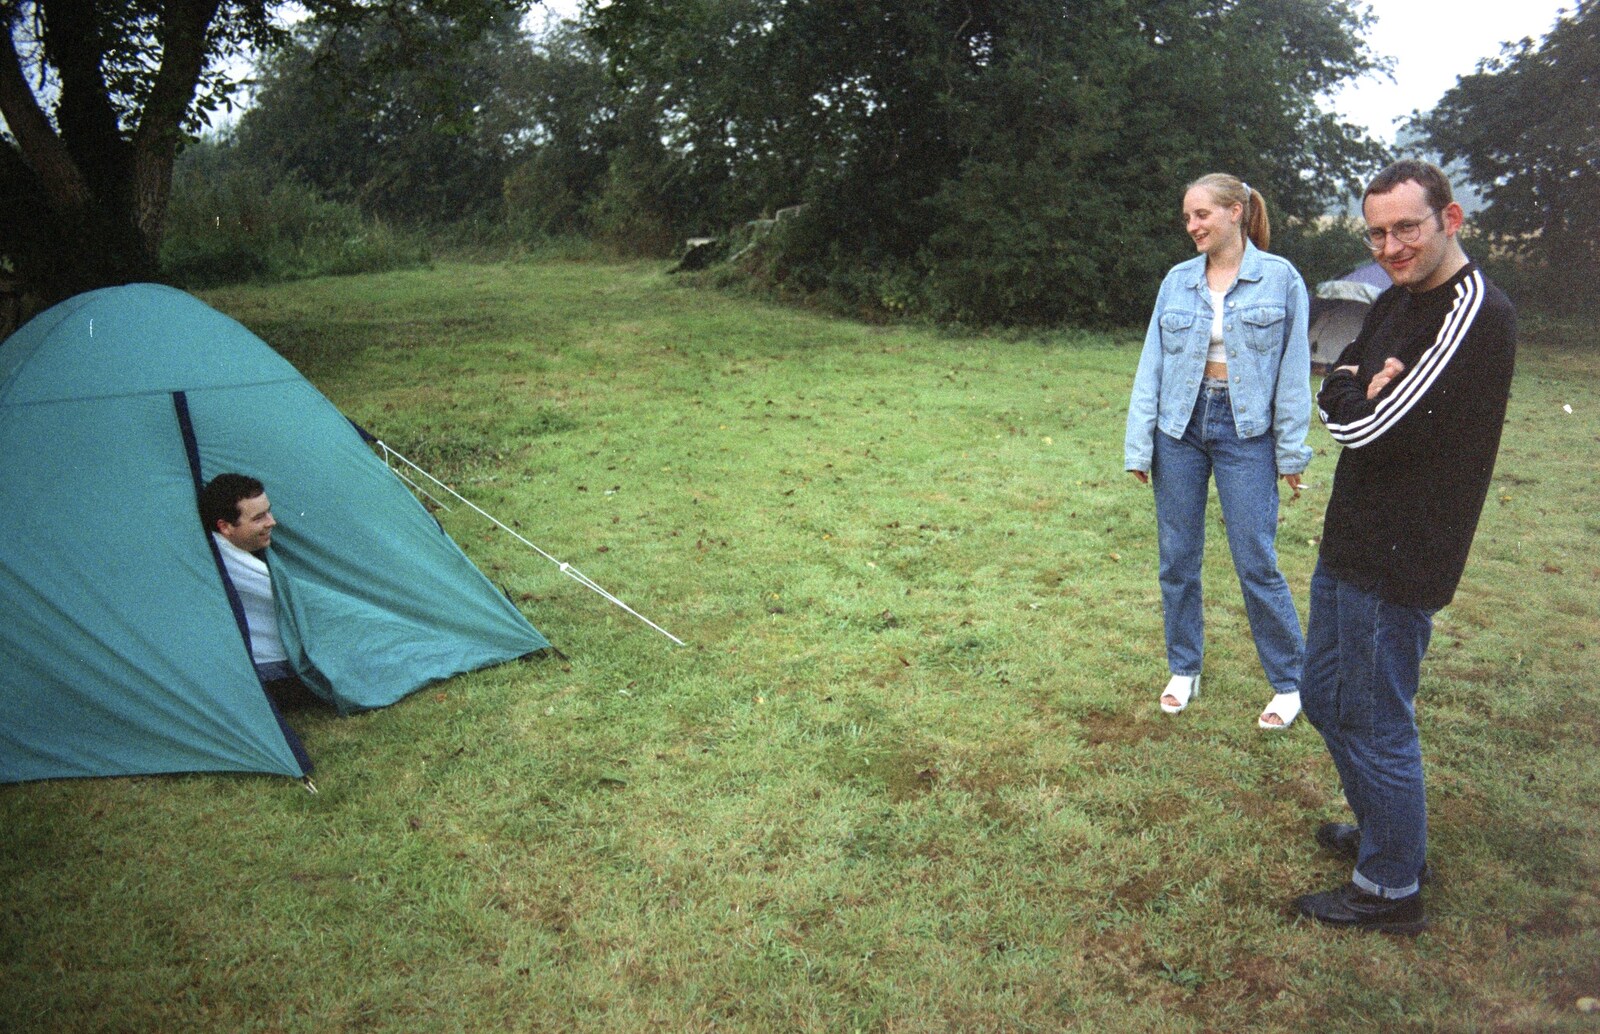 Elen and Dougie look at Russell's tent from Bromestock 1 and a Mortlock Barbeque, Brome and Thrandeston, Suffolk - 24th June 1997